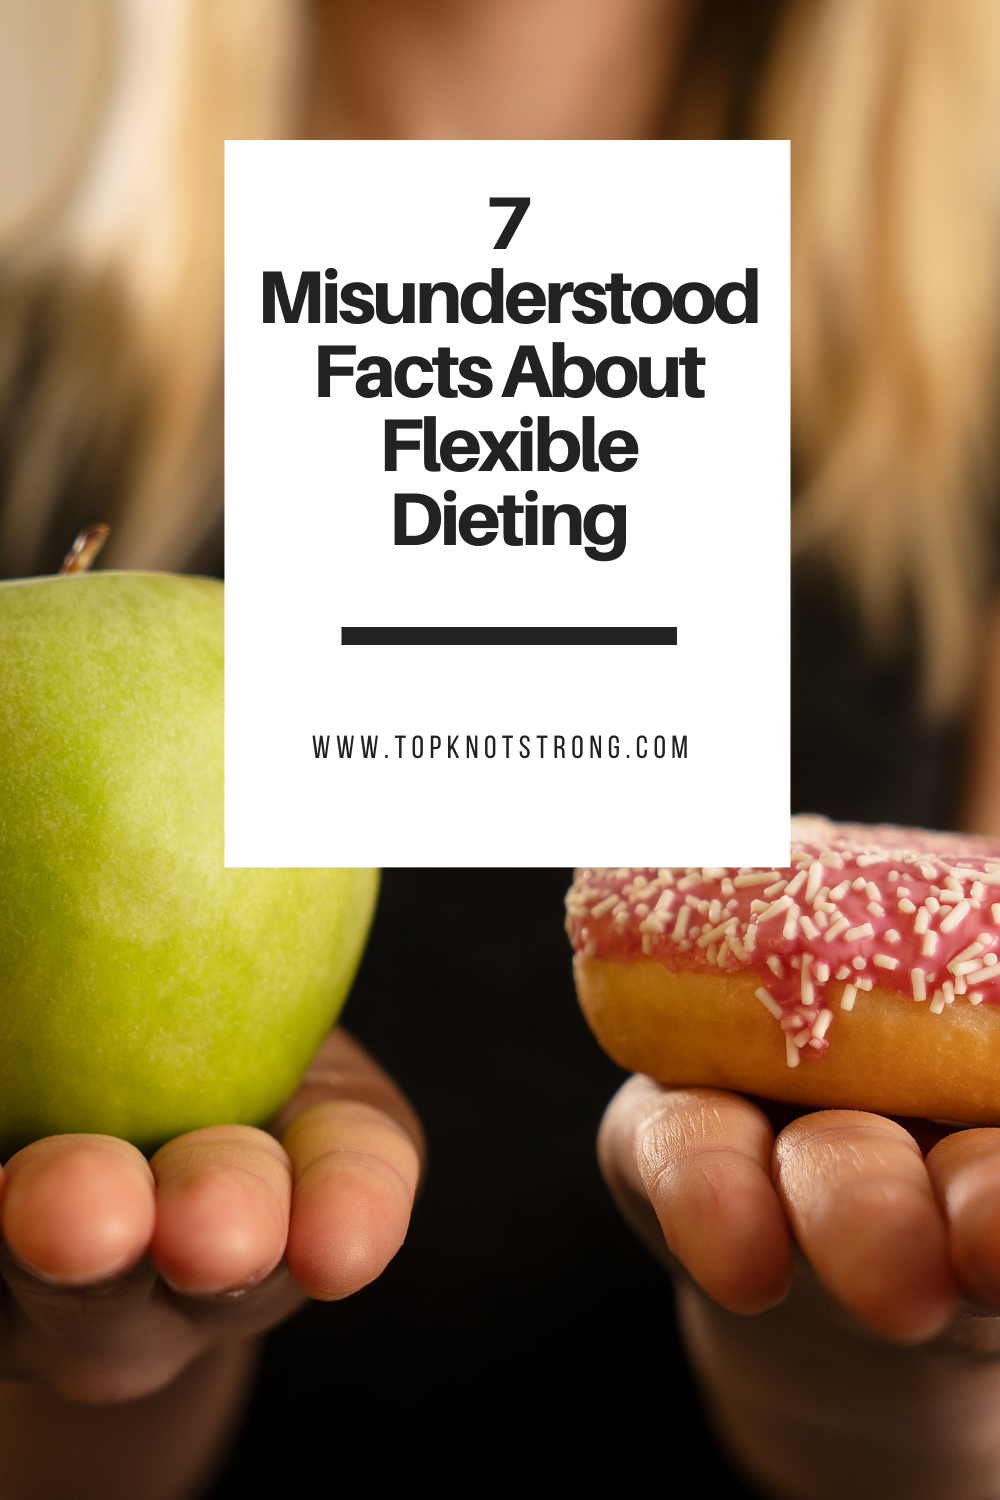 7 Misunderstood Facts About Flexible Dieting